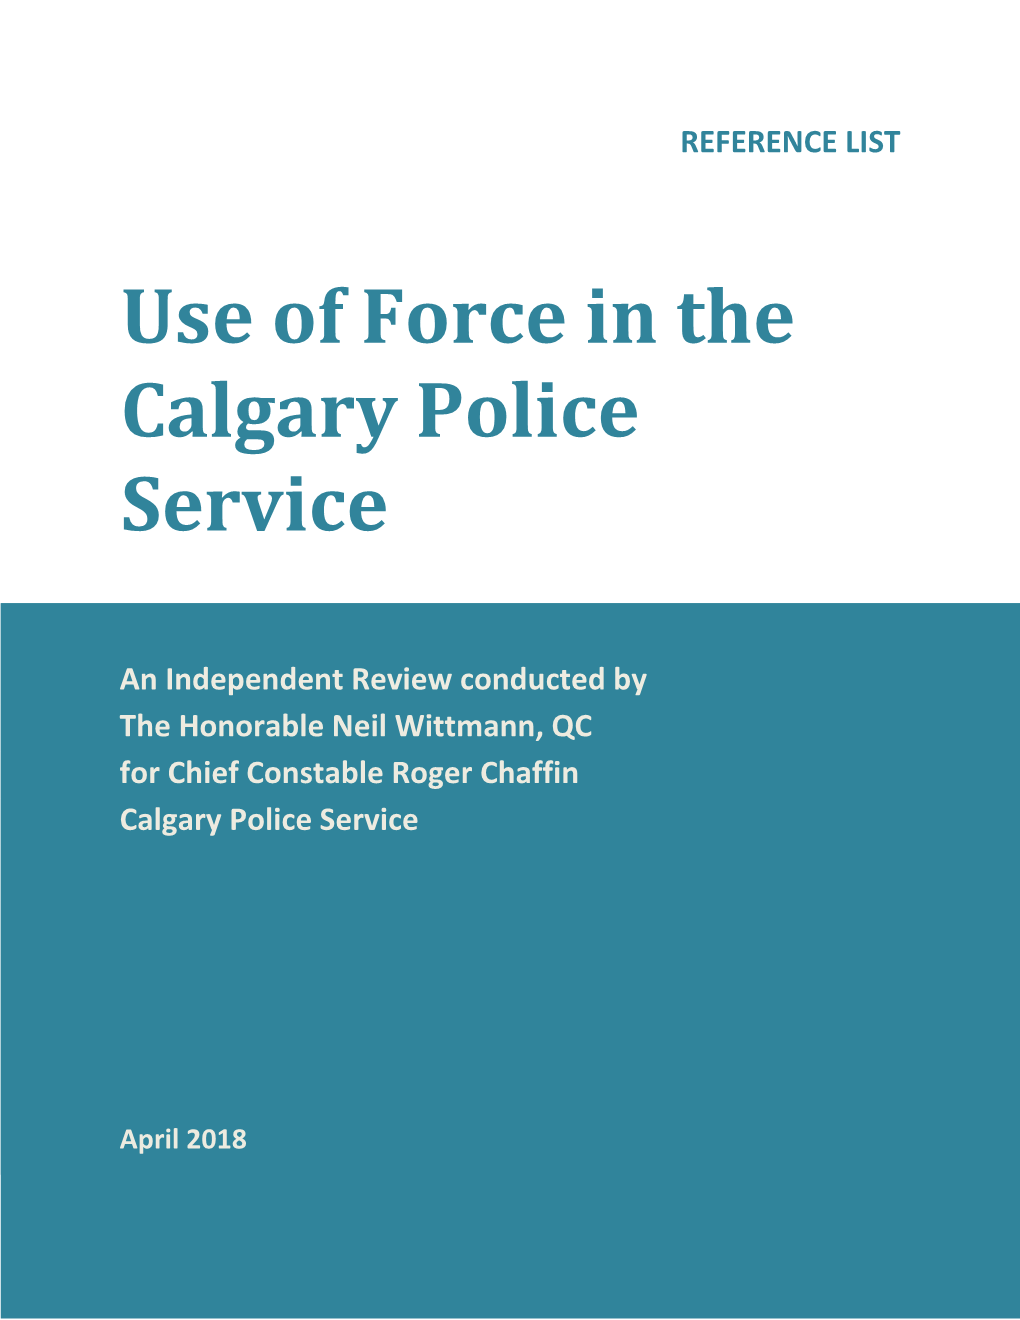 Use of Force in the Calgary Police Service